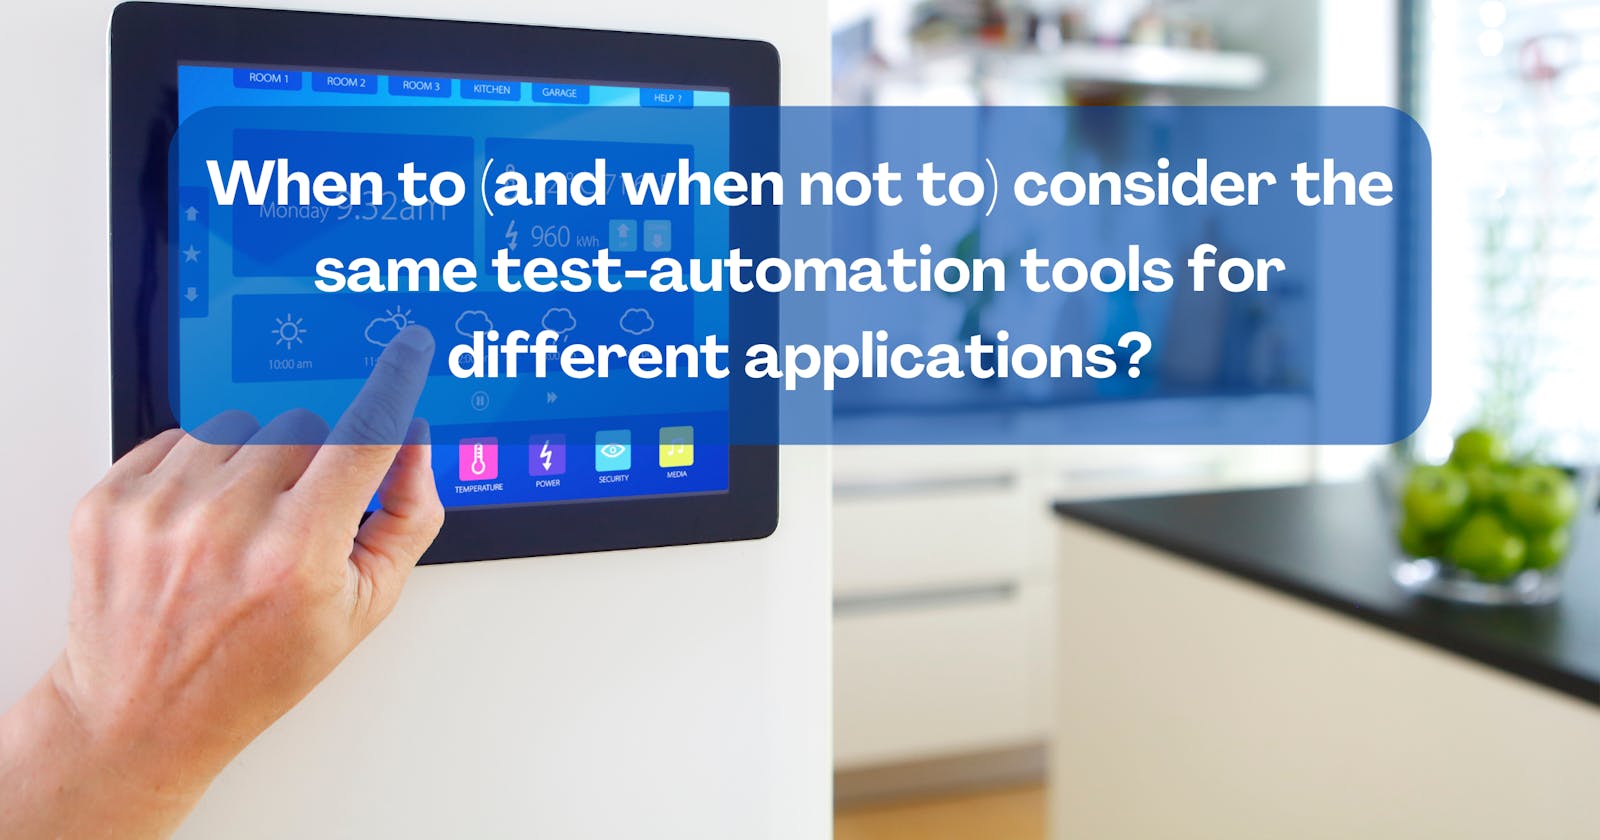 When to (and when not to) consider the same test-automation tools for different applications?